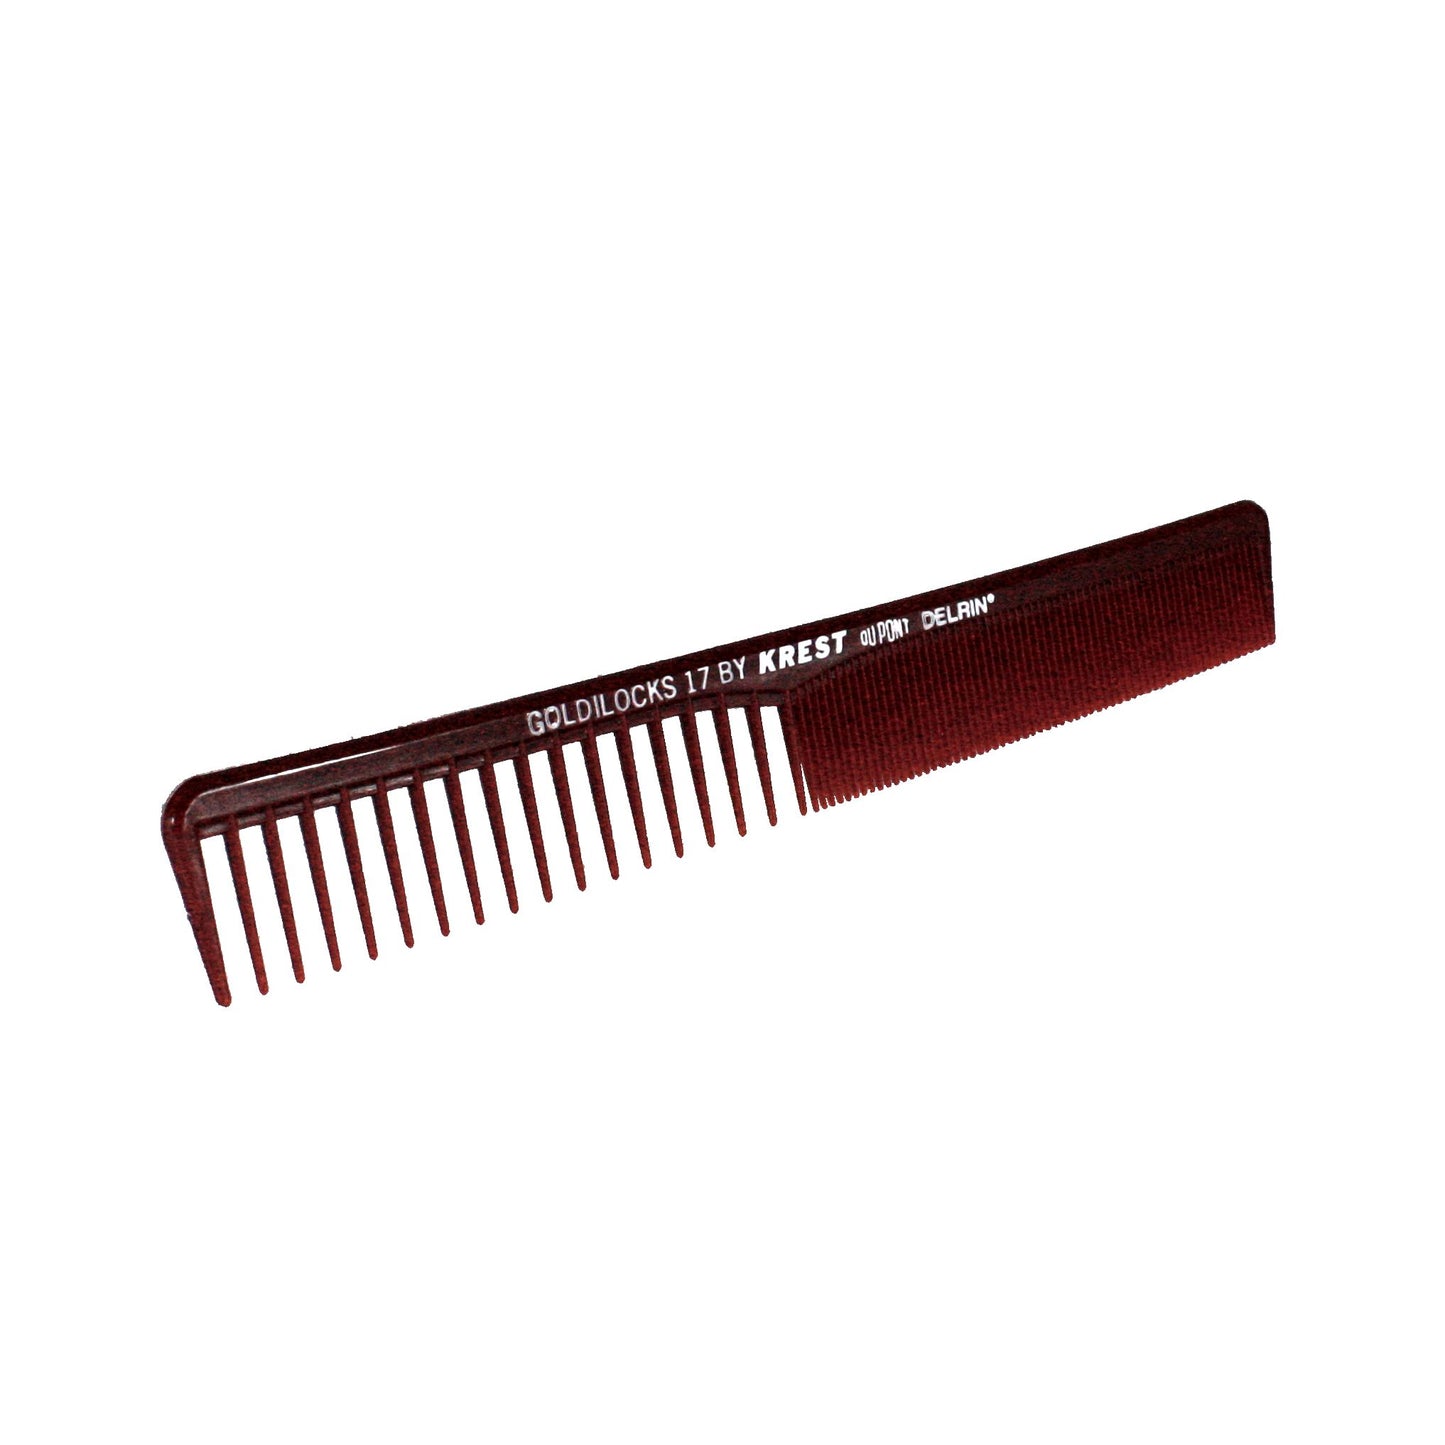 7" Volume/Space Fine Tooth Styler Comb - CLOSEOUT, LIMITED STOCK AVAILABLE